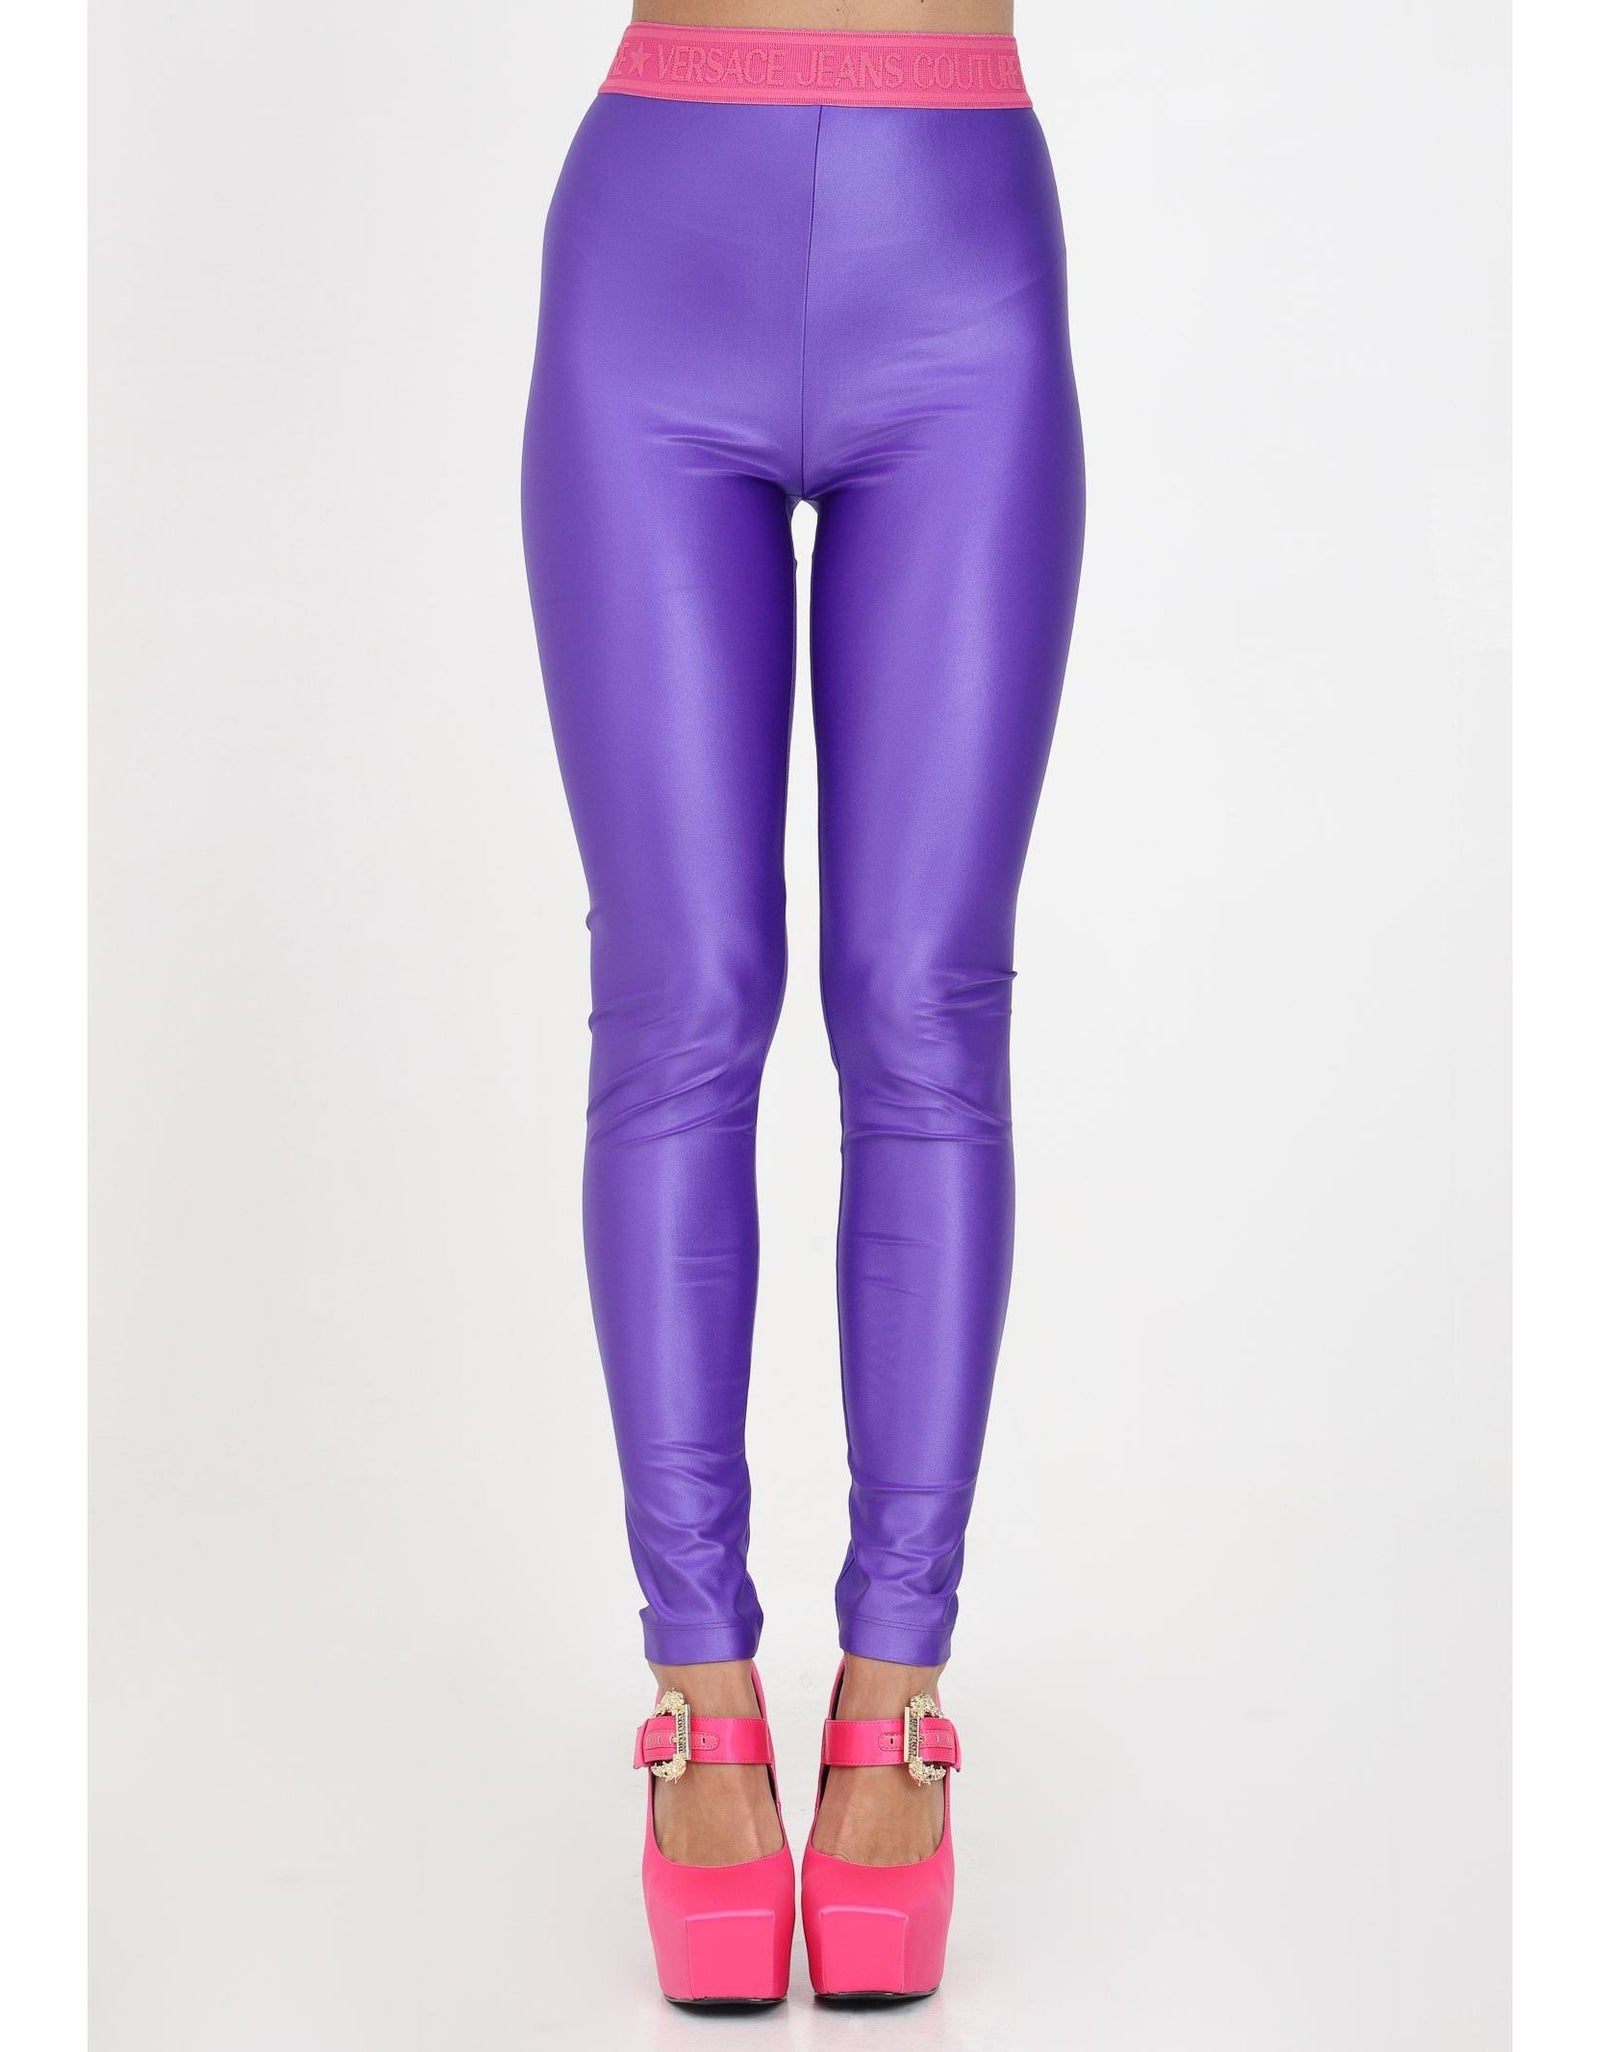 VERSACE JEANS COUTURE LEGGINGS WITH LOGOED BAND– Yooto